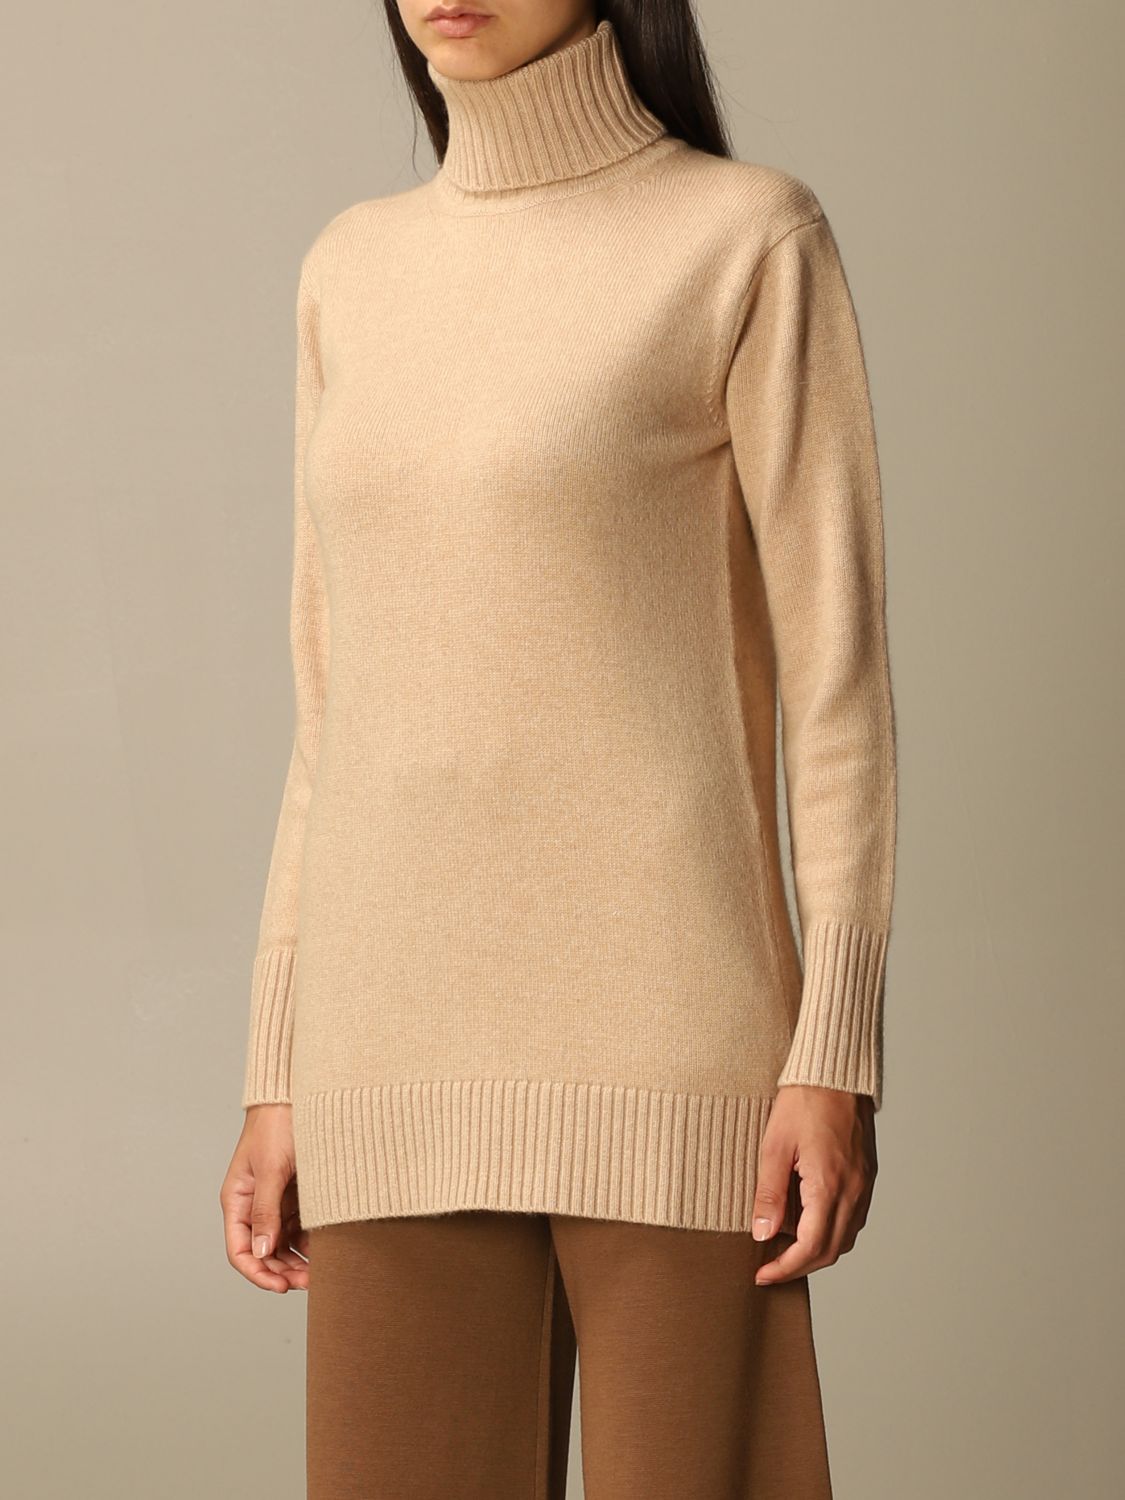 MAX MARA: Nastro pullover in wool and cashmere - Camel | Sweater Max ...